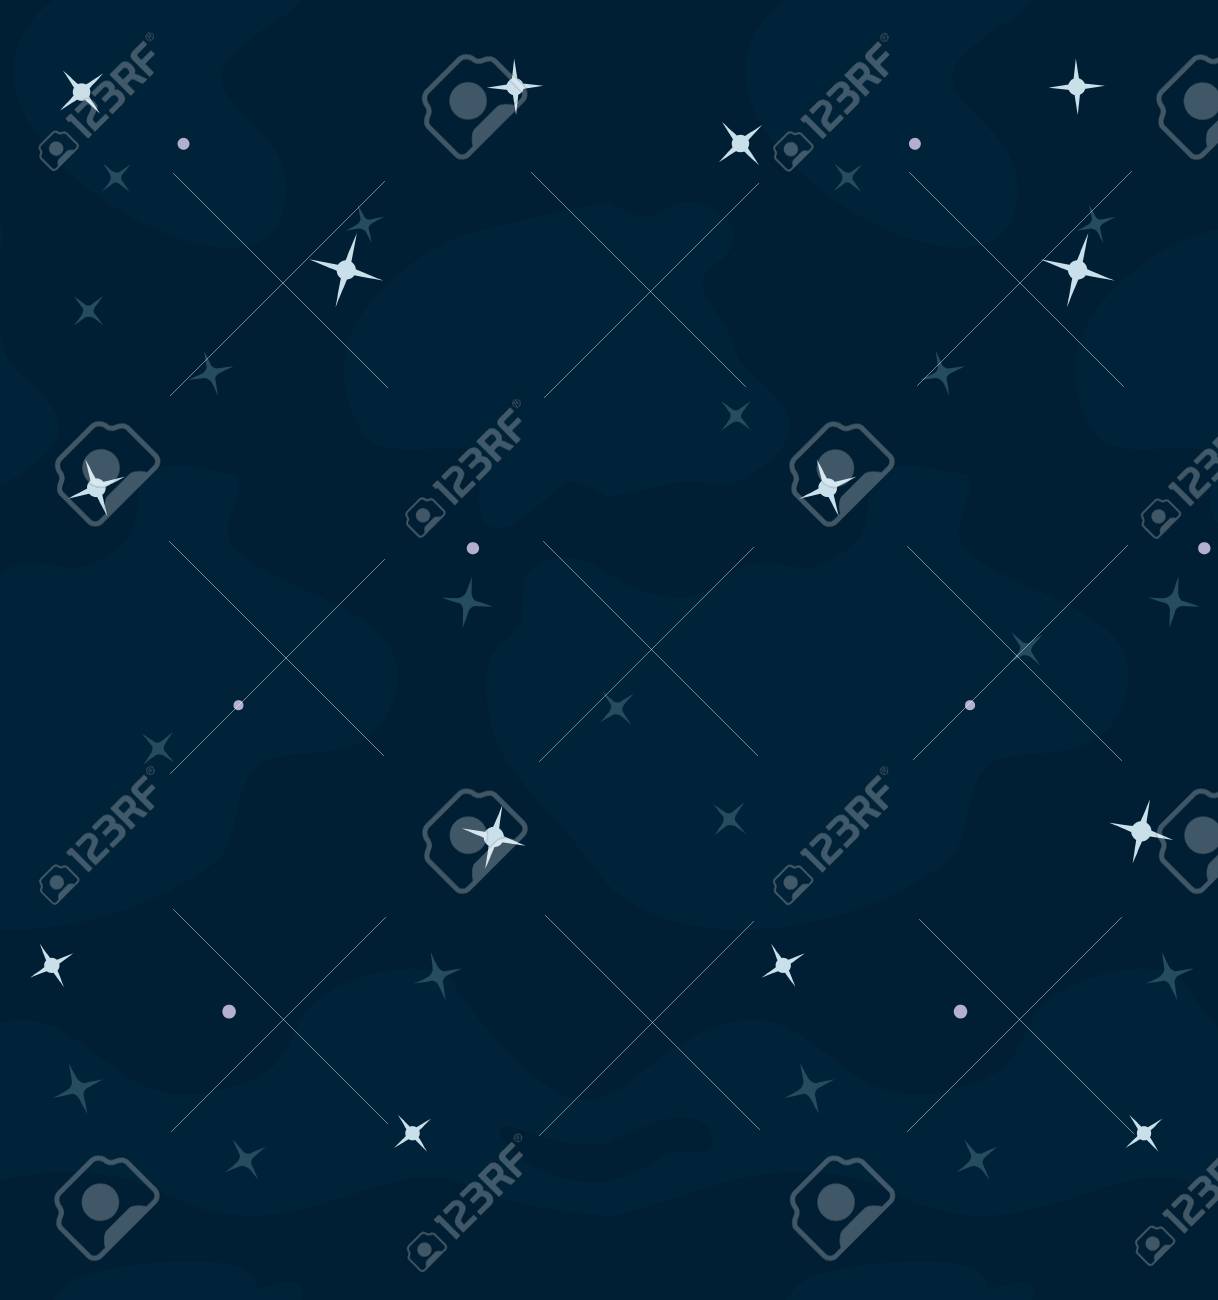 Space Vector Cartoon Background With Stars Royalty